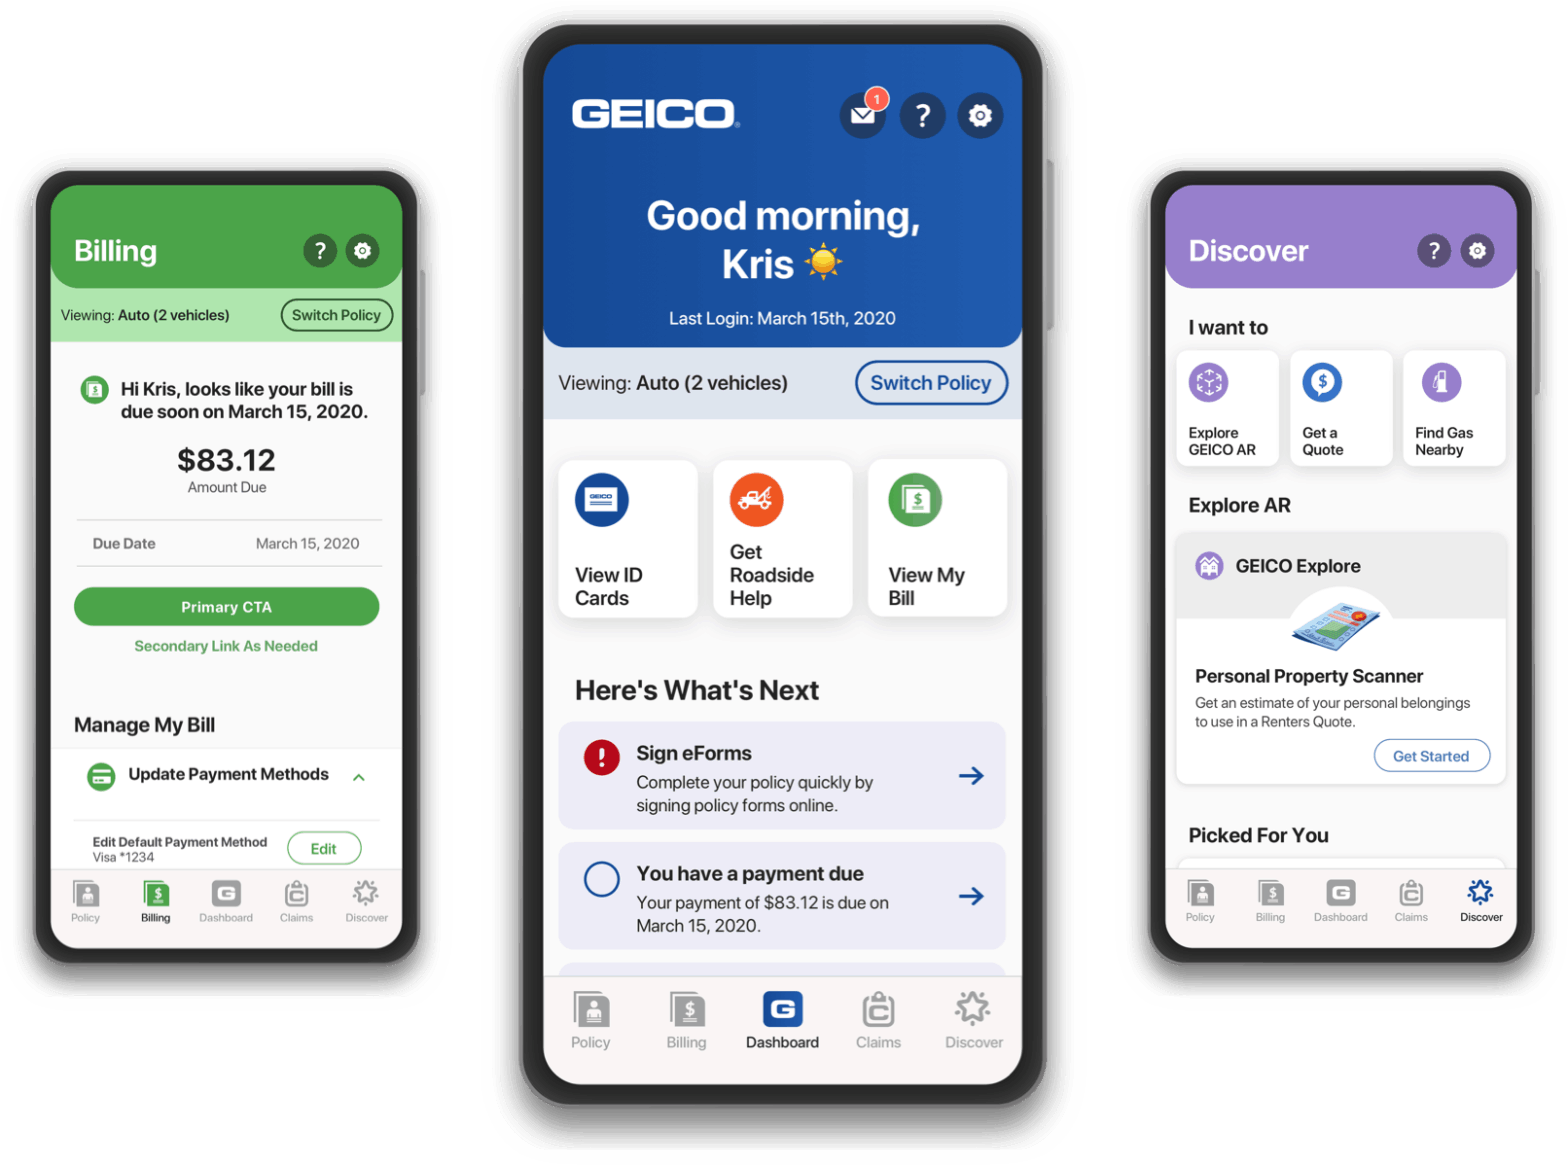 How to Download and Use the Geico Mobile App